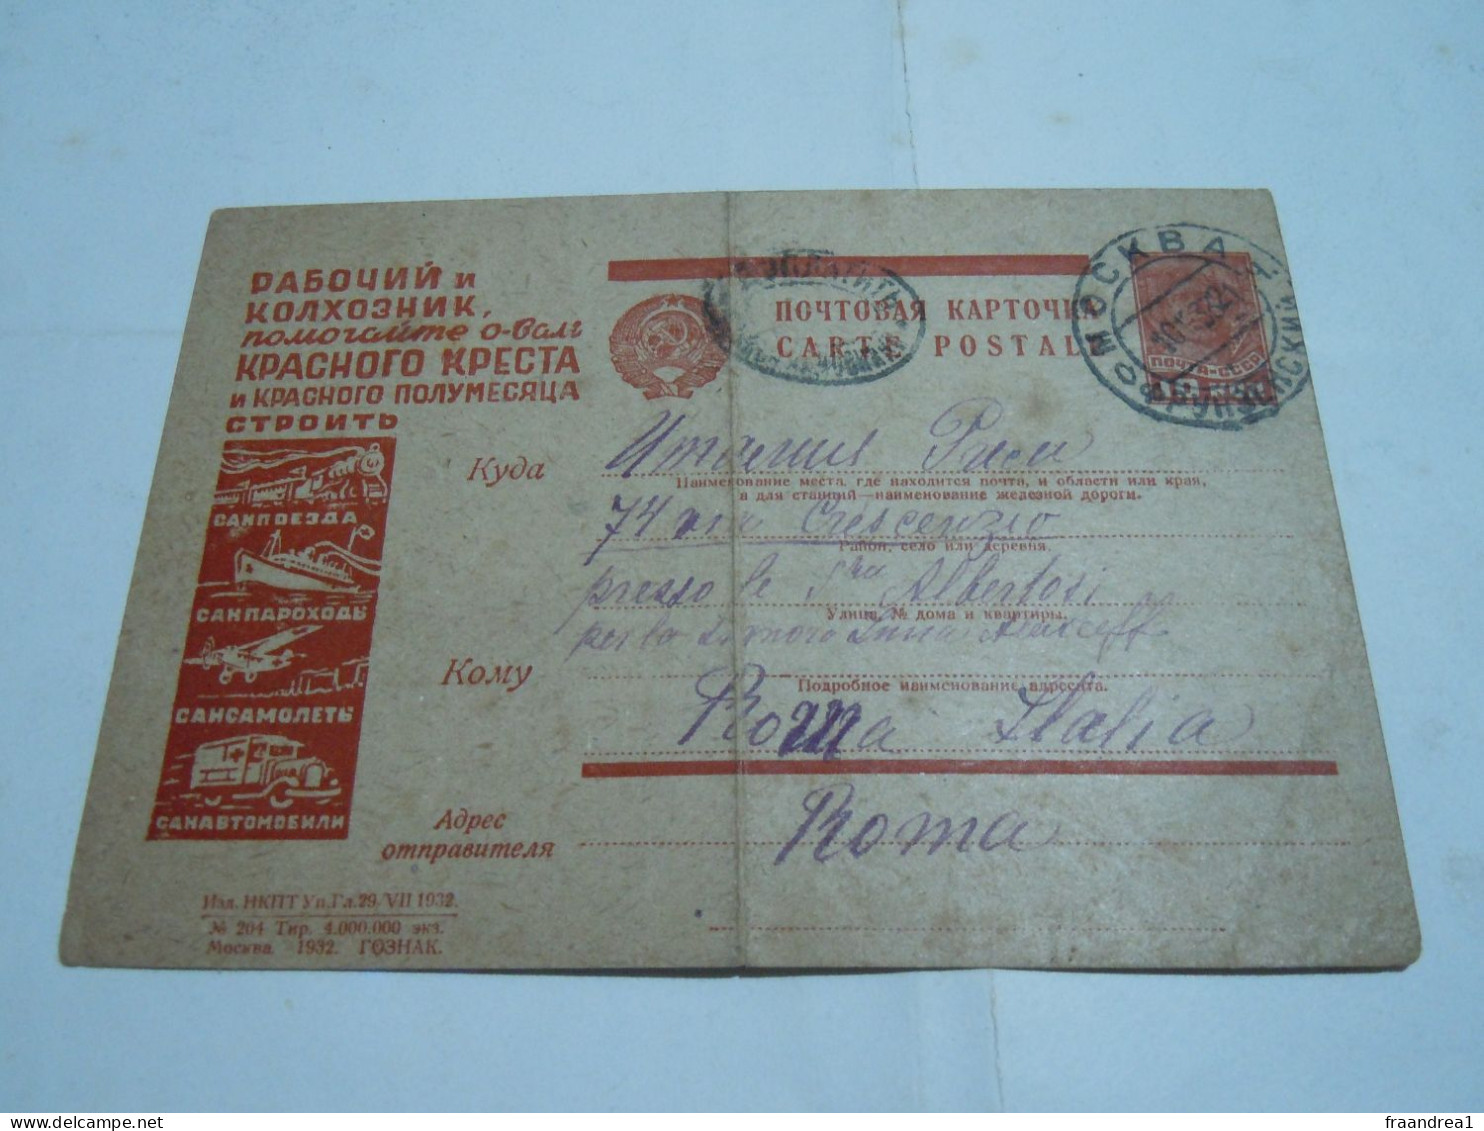 Russia USSR Postal Stationery Postcard Cover 1933  TO ROMA  ITALY N 1 - Cartas & Documentos